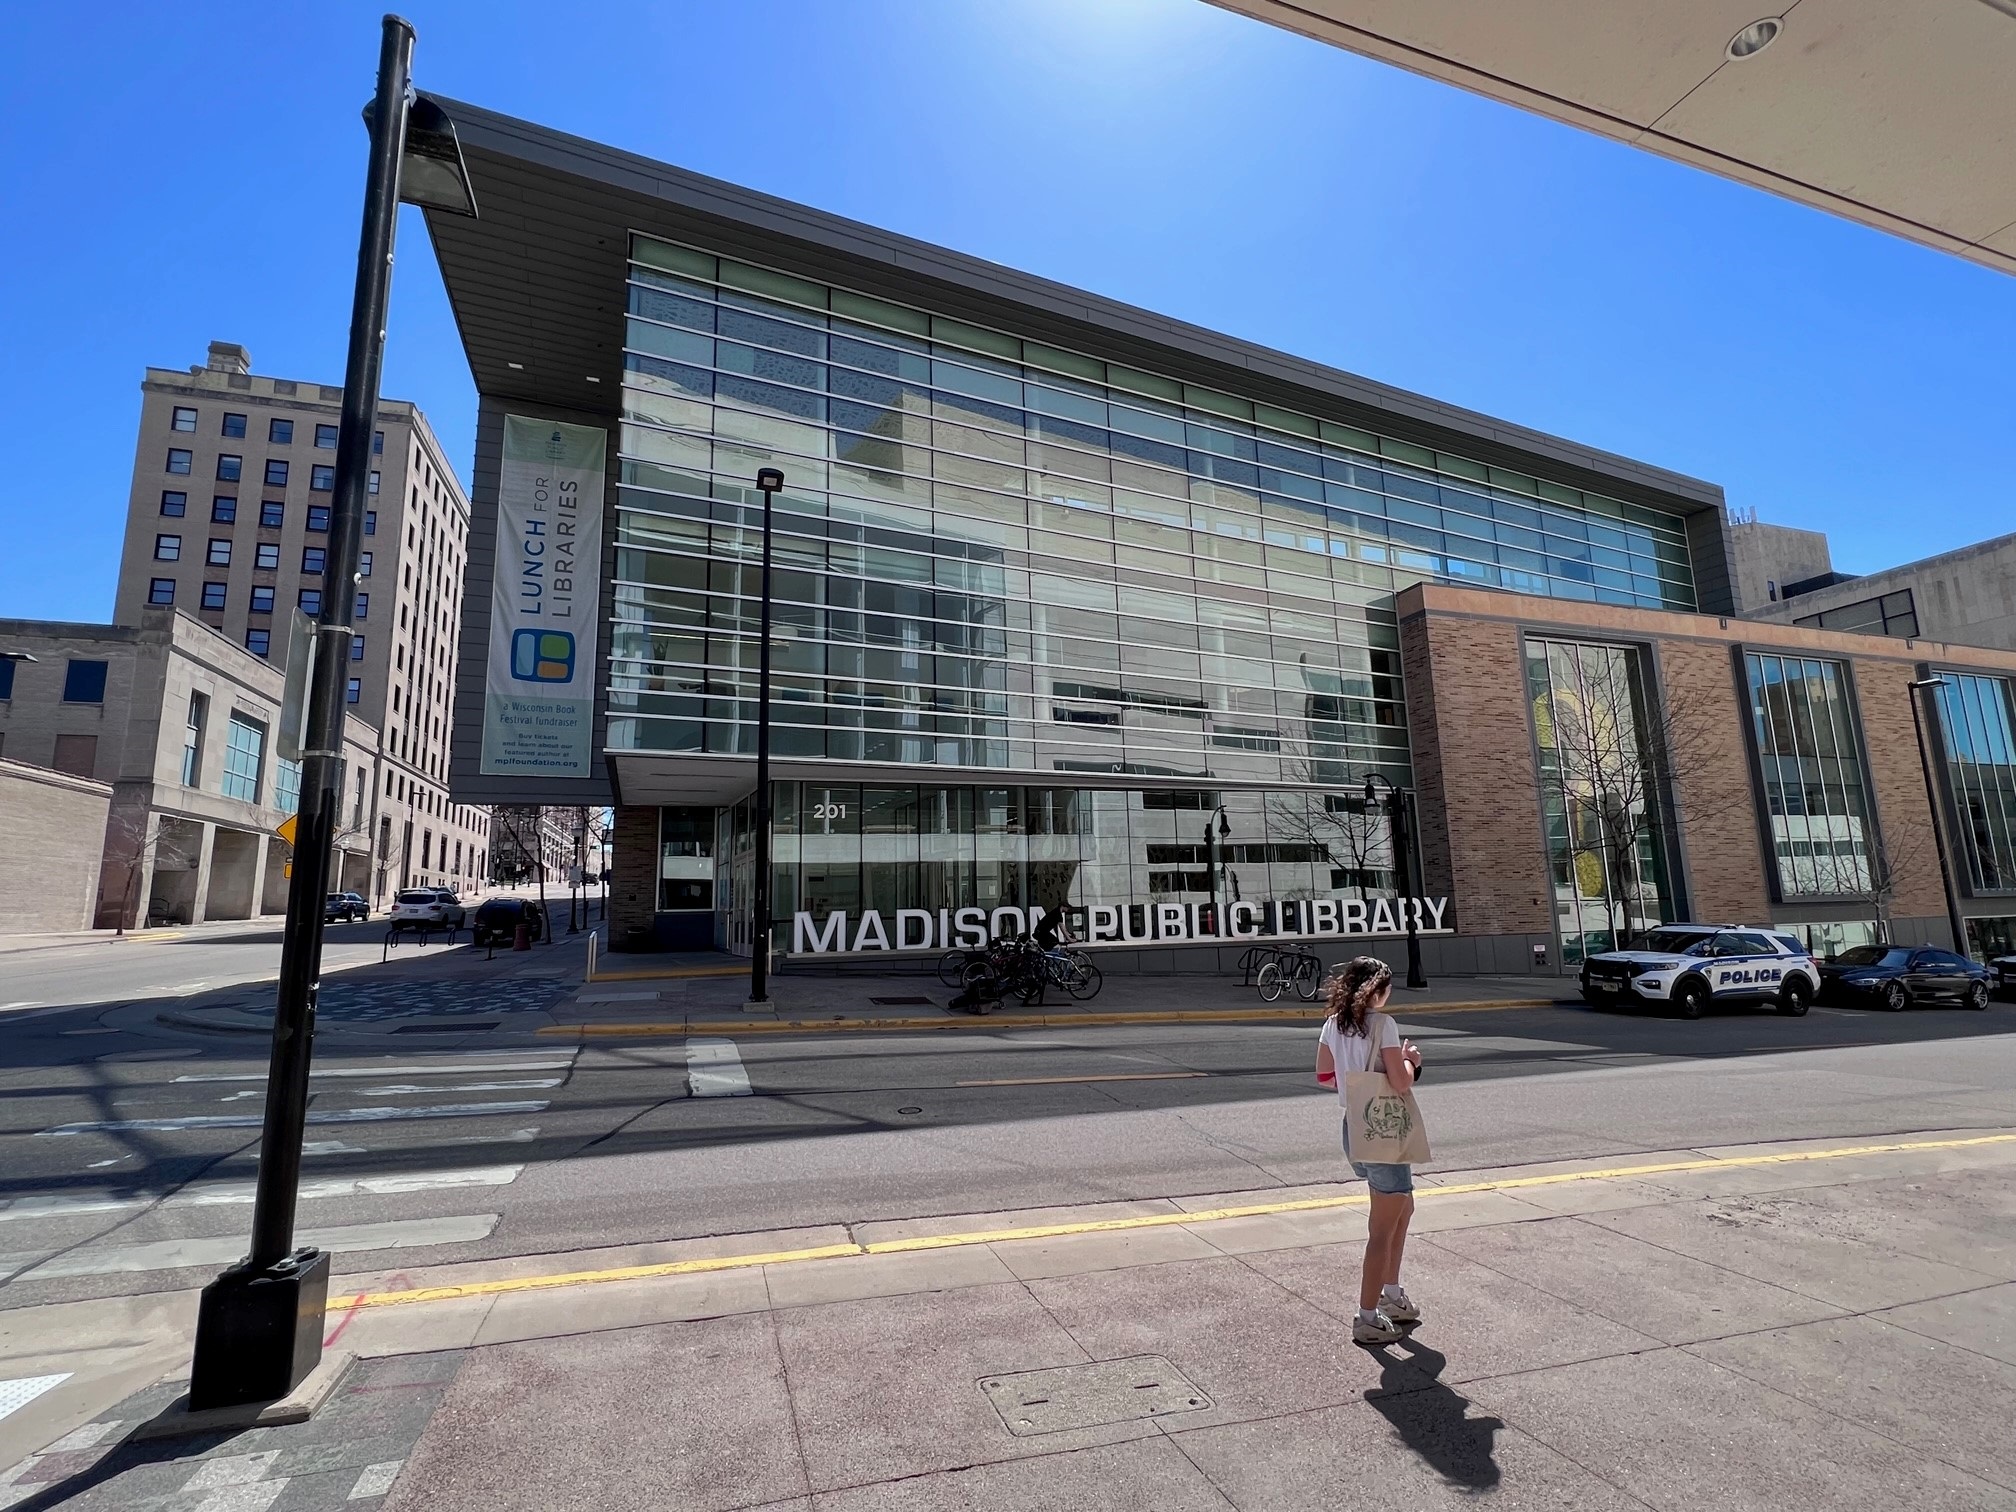 The Madison Public Library and the court system’s Office of Management Services have formed a partnership in launching a new recruiting and job resources effort in the Madison area.